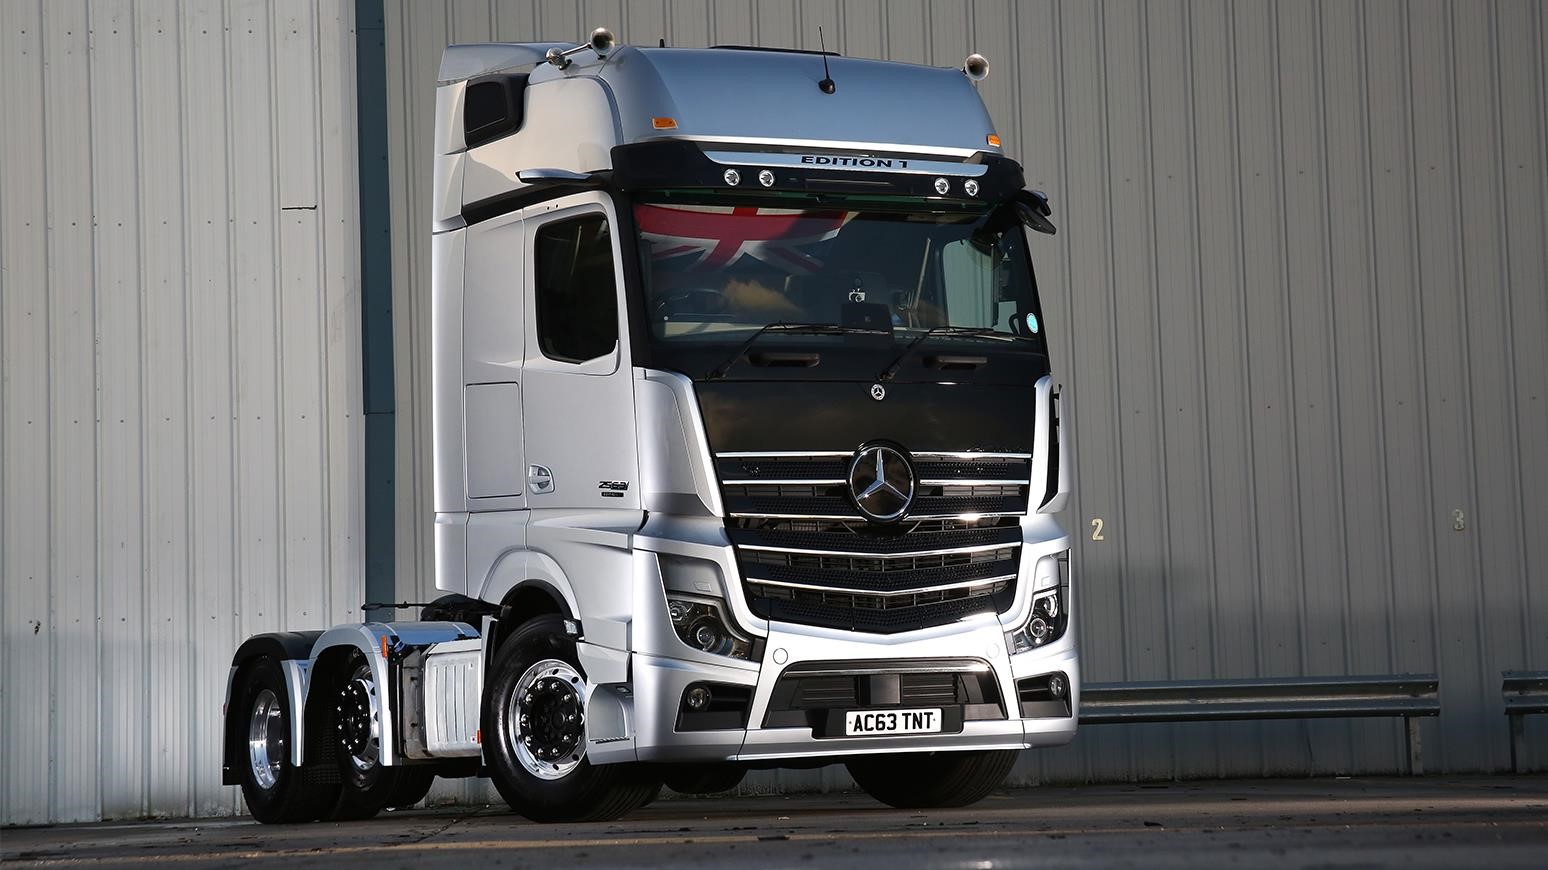 Tilbury-Based Transporter Adds One Of 35 Mercedes-Benz Actros Edition 1 Trucks Available In The UK